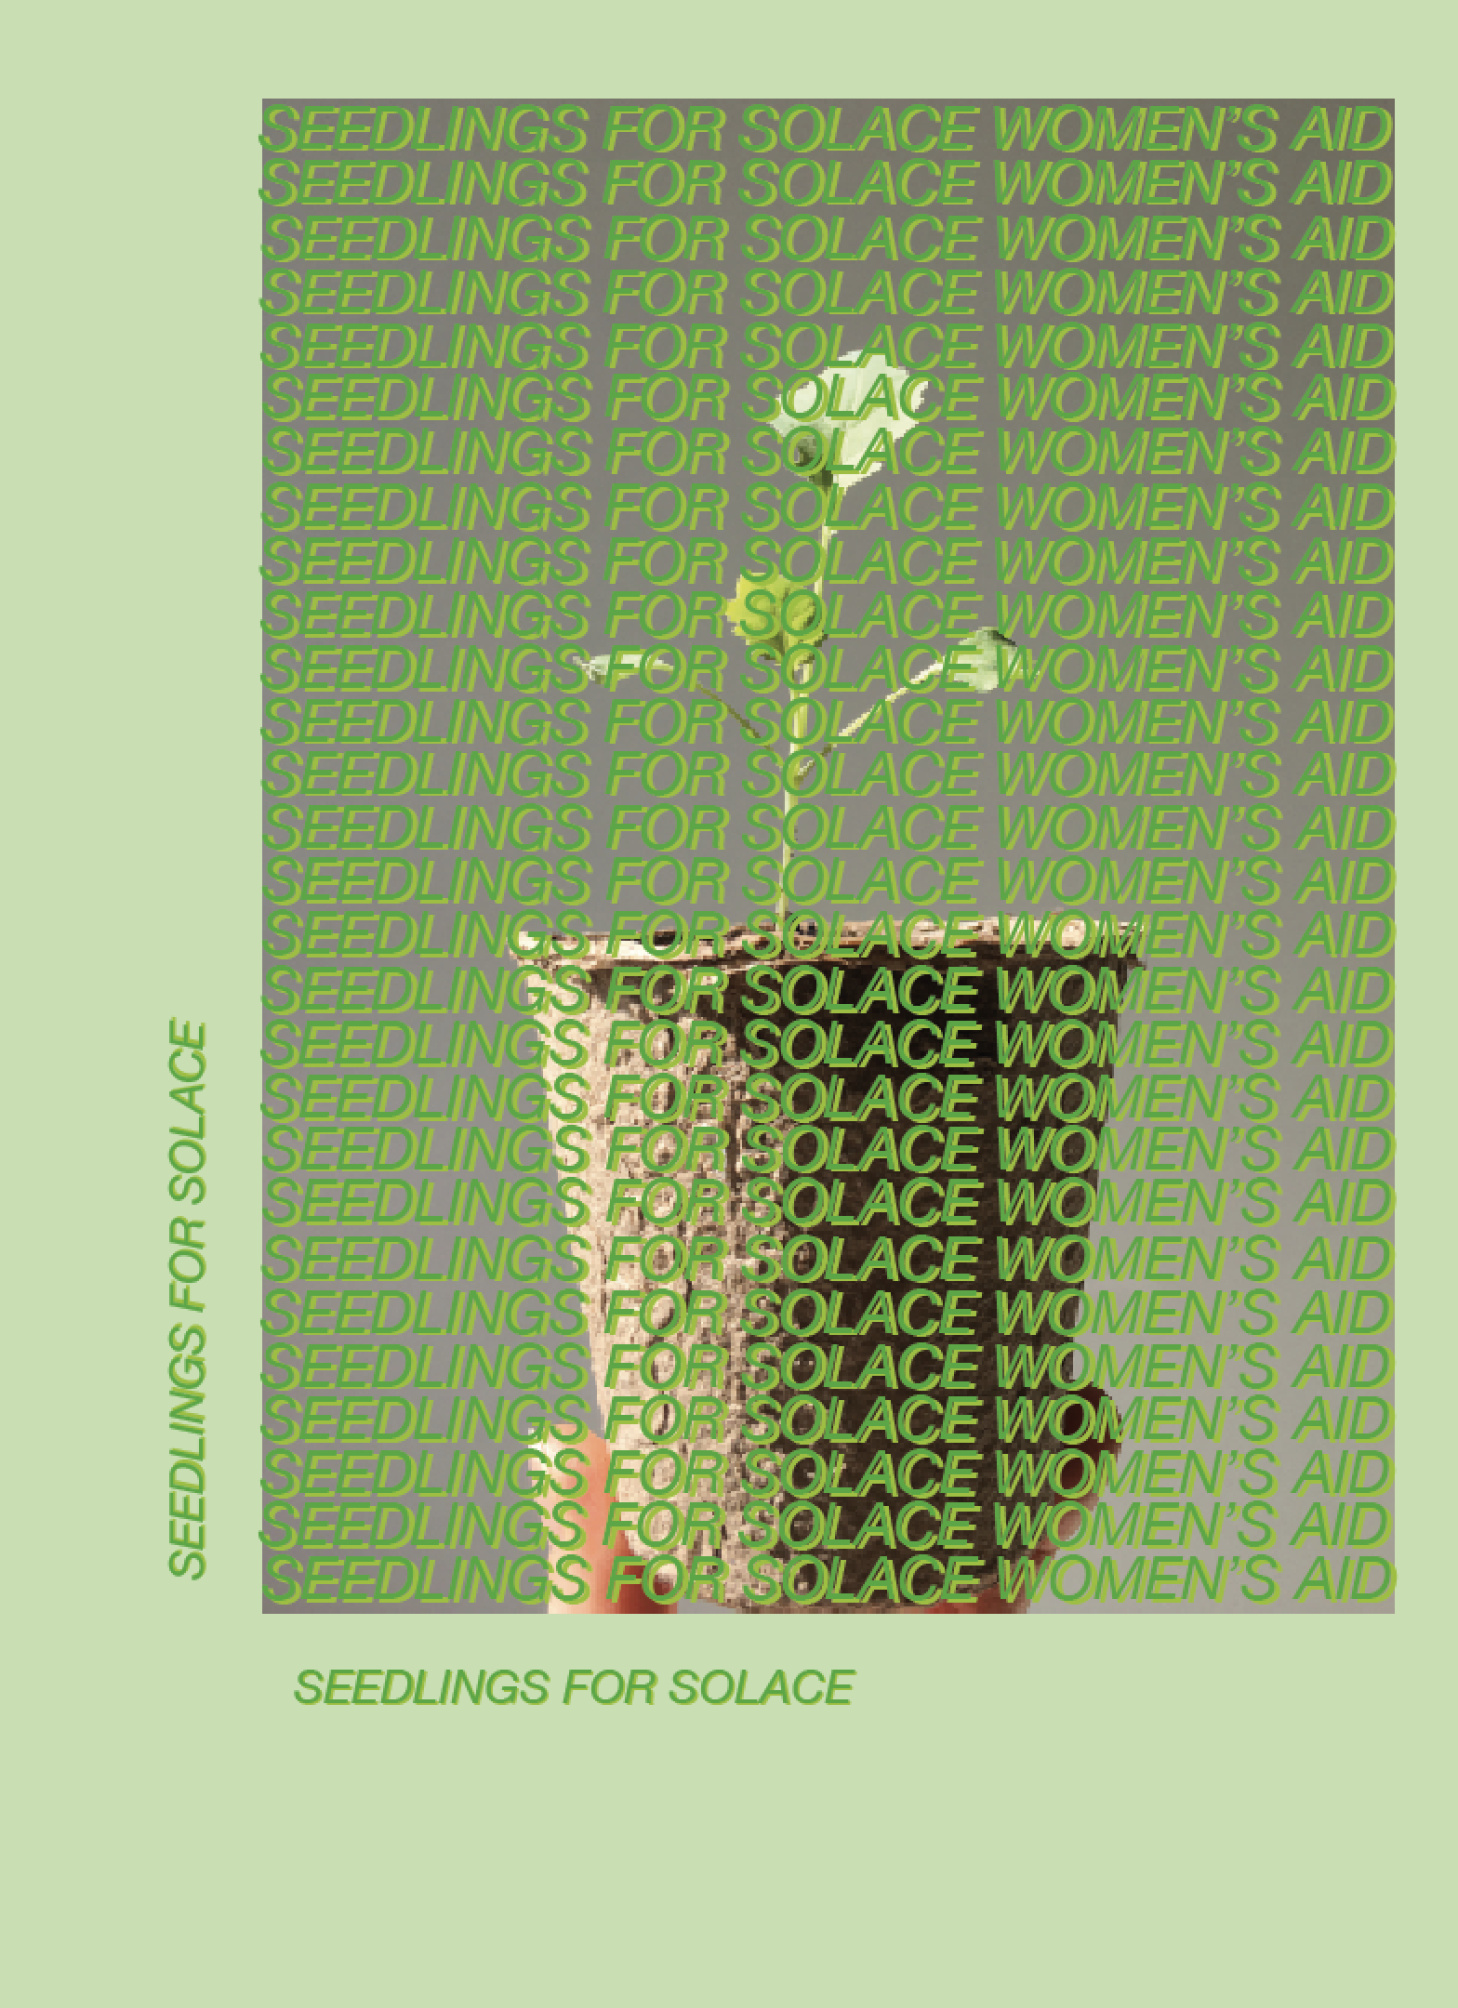 Seedlings for Solace